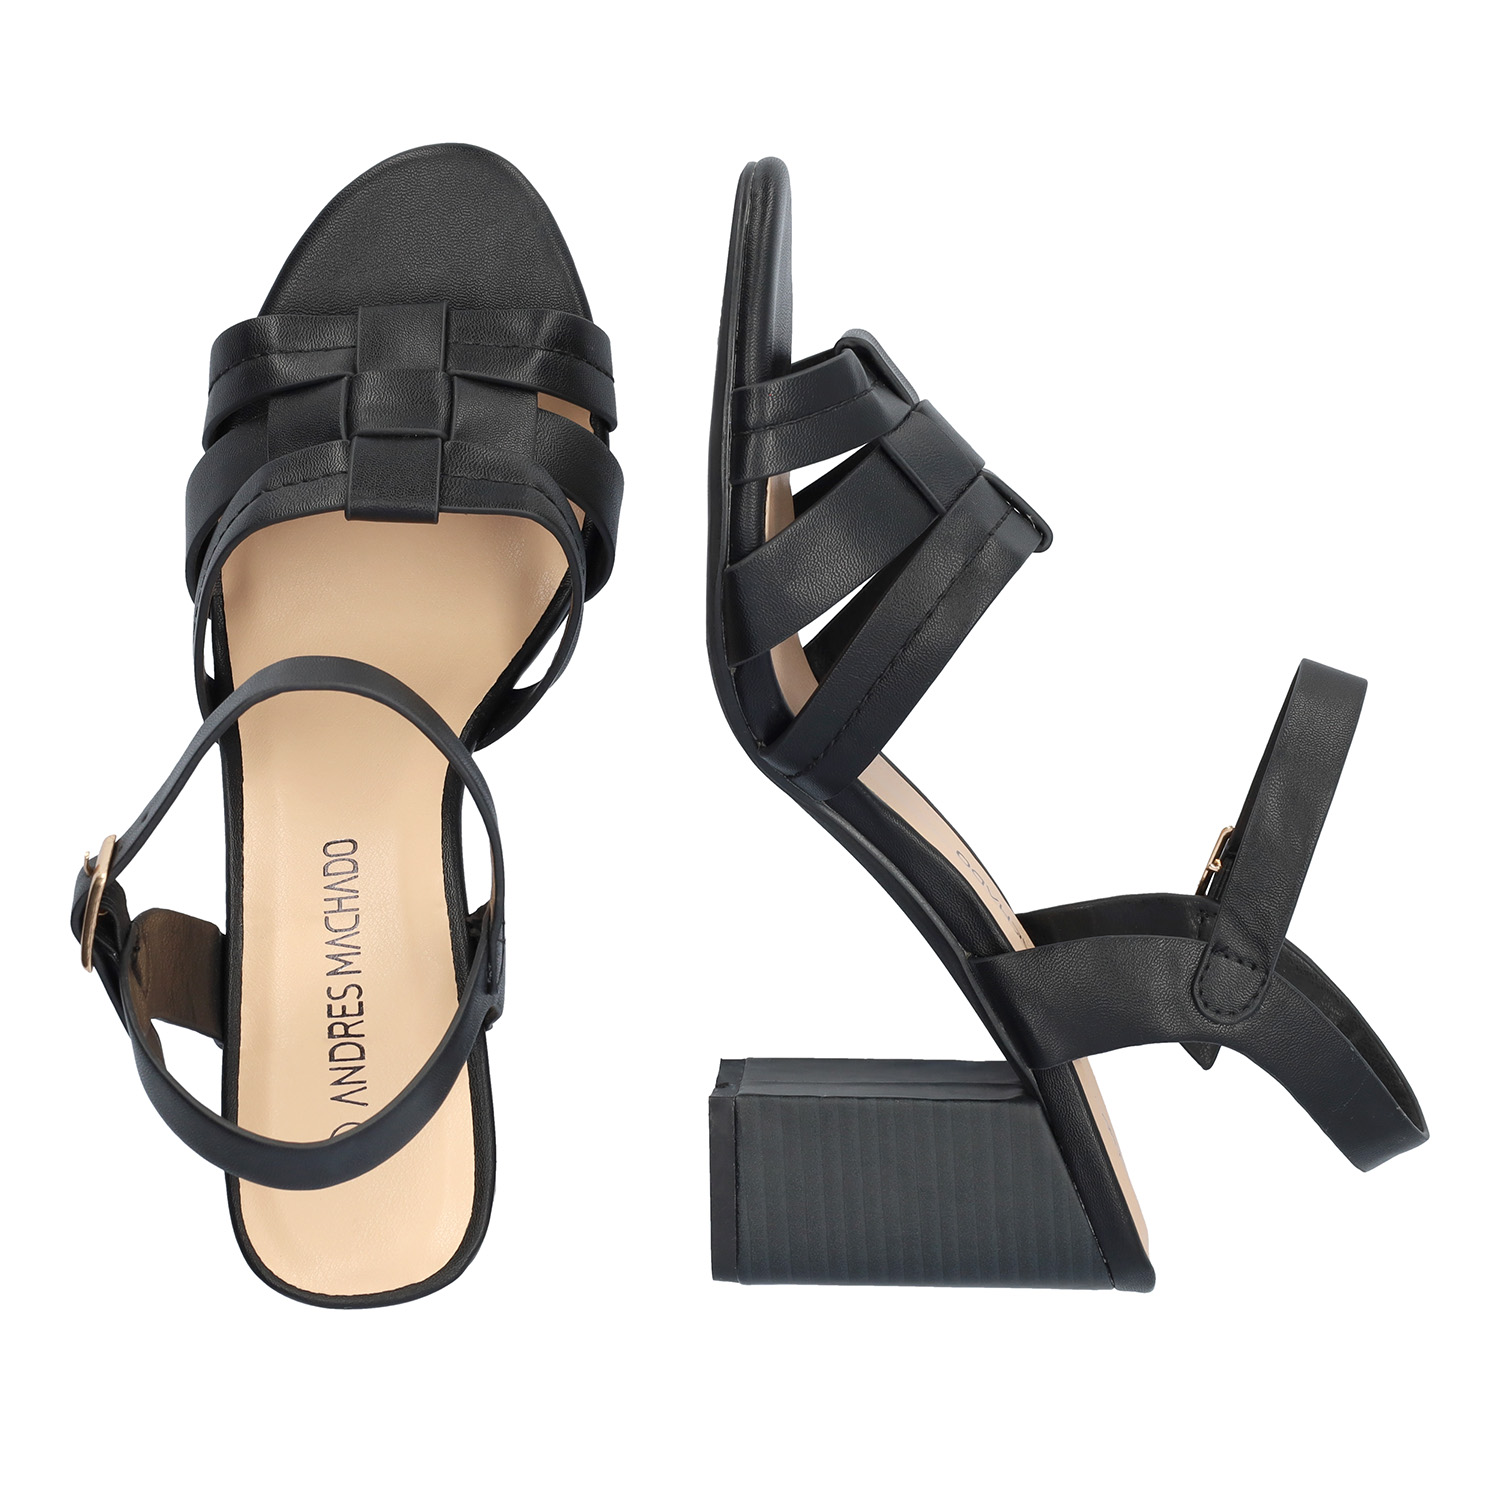 Soft black colored sandals with squared heel 